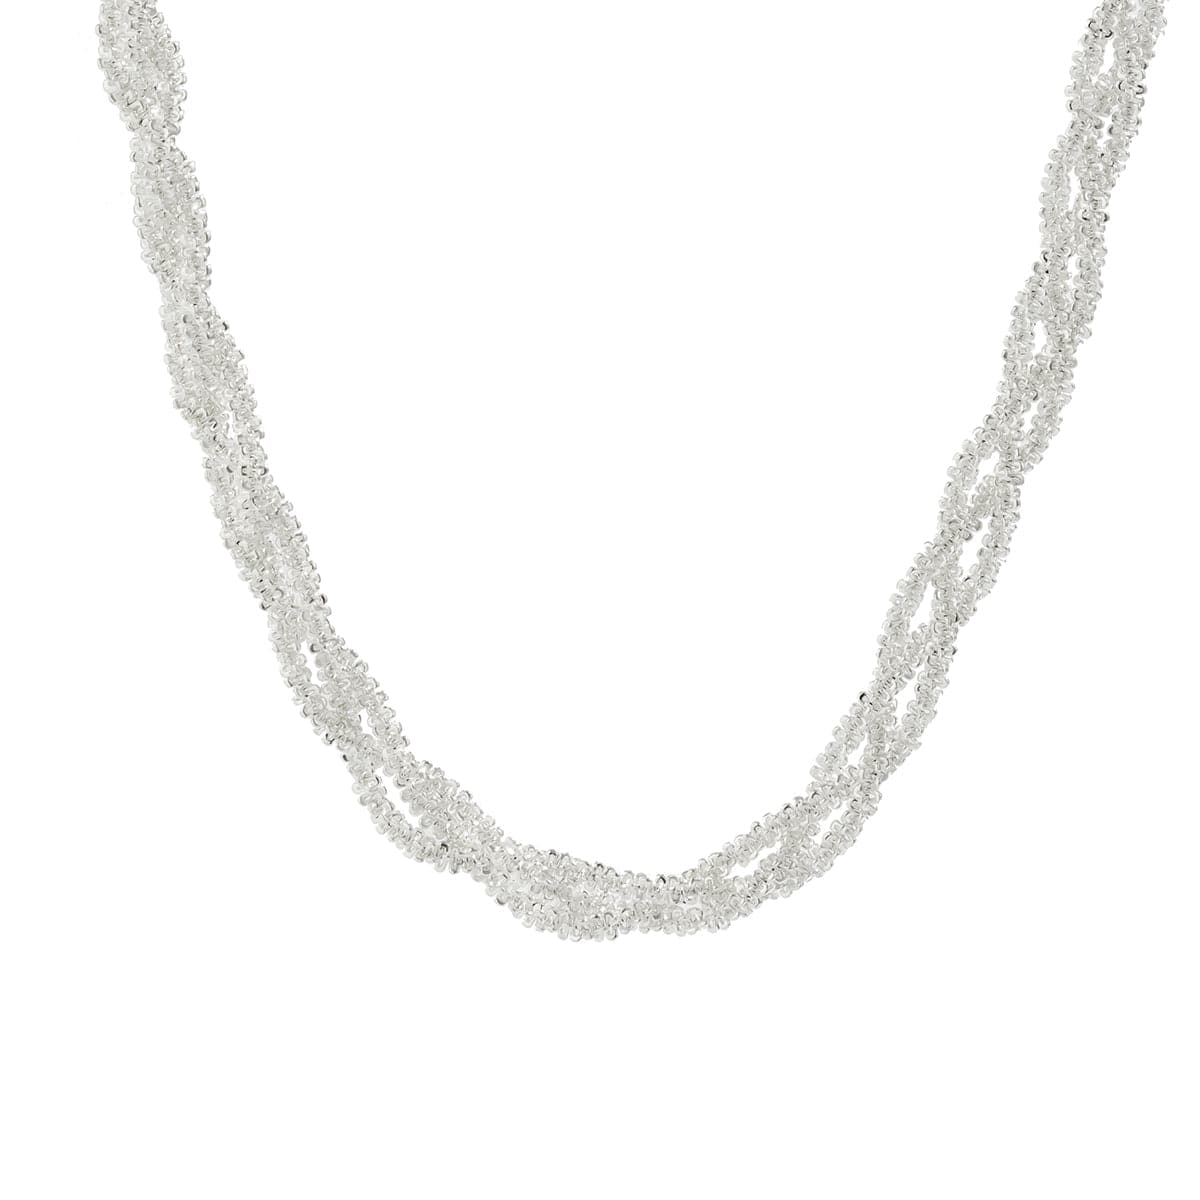 Silver-Toned Beaded Braided Necklace – Richeera